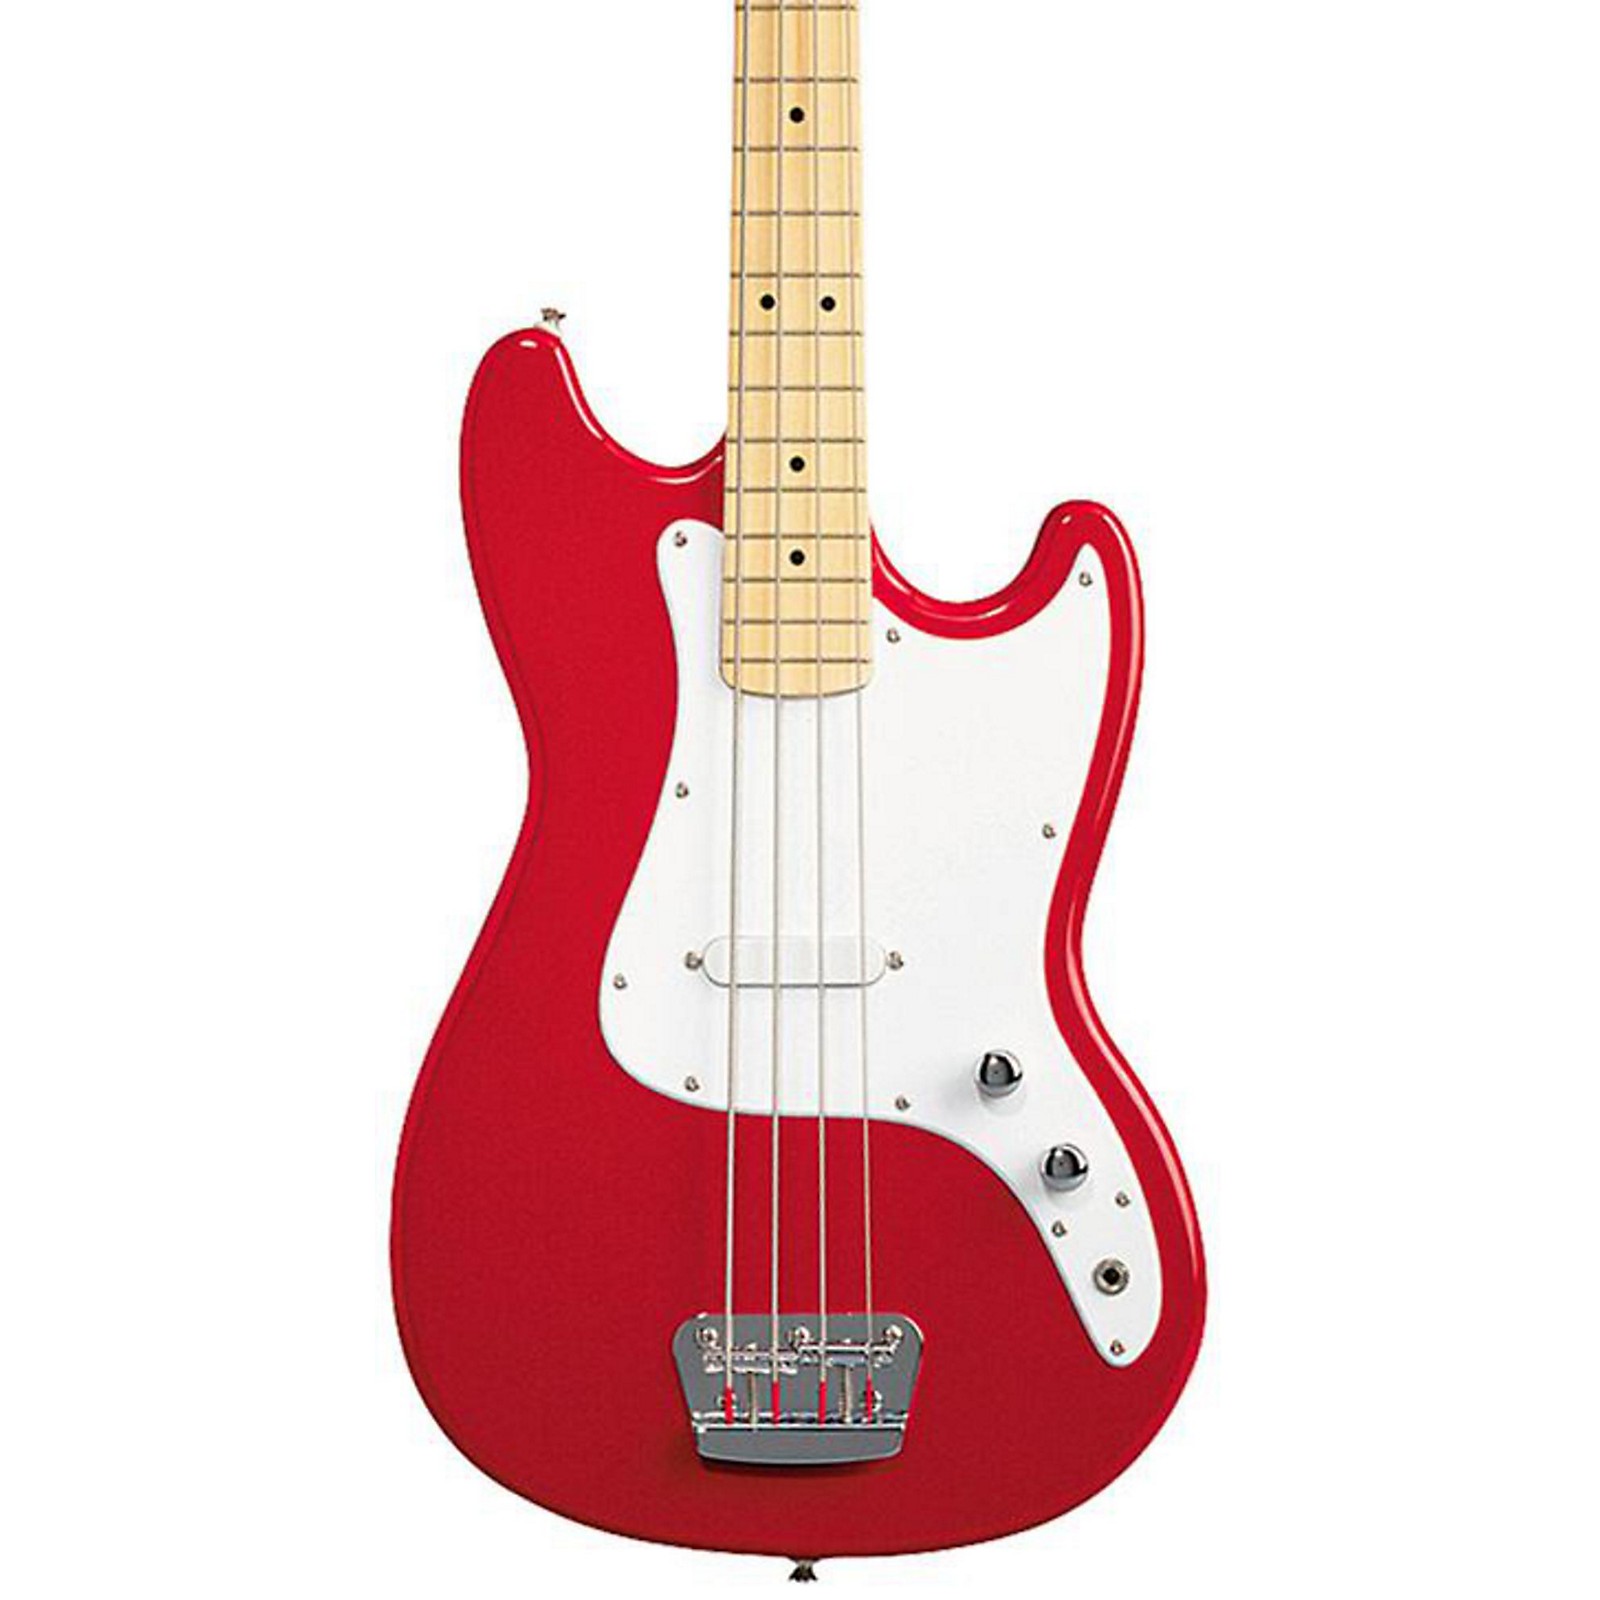 Red bass. Squier Bronco Bass. Fender c60 электро. Fender Squier бридж. Fender Squier Red short Scale.